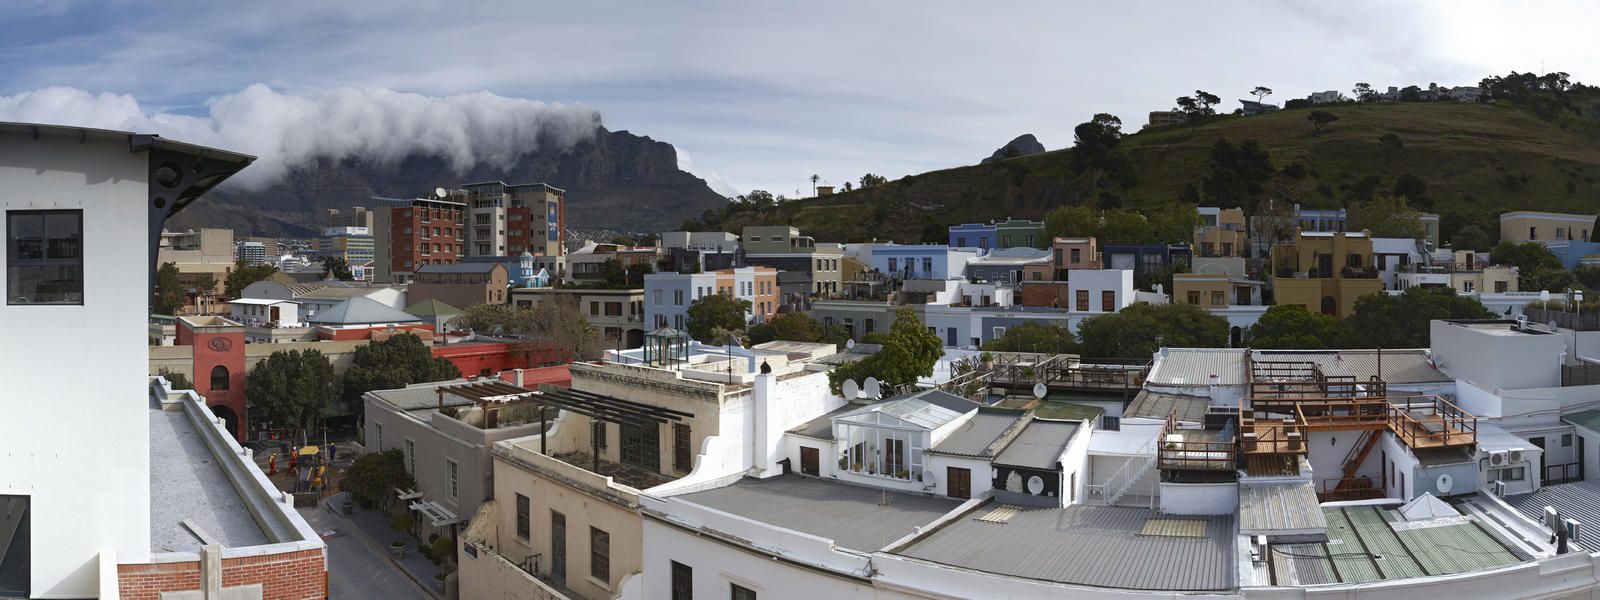 46 On Loader Street De Waterkant Cape Town Western Cape South Africa Mountain, Nature